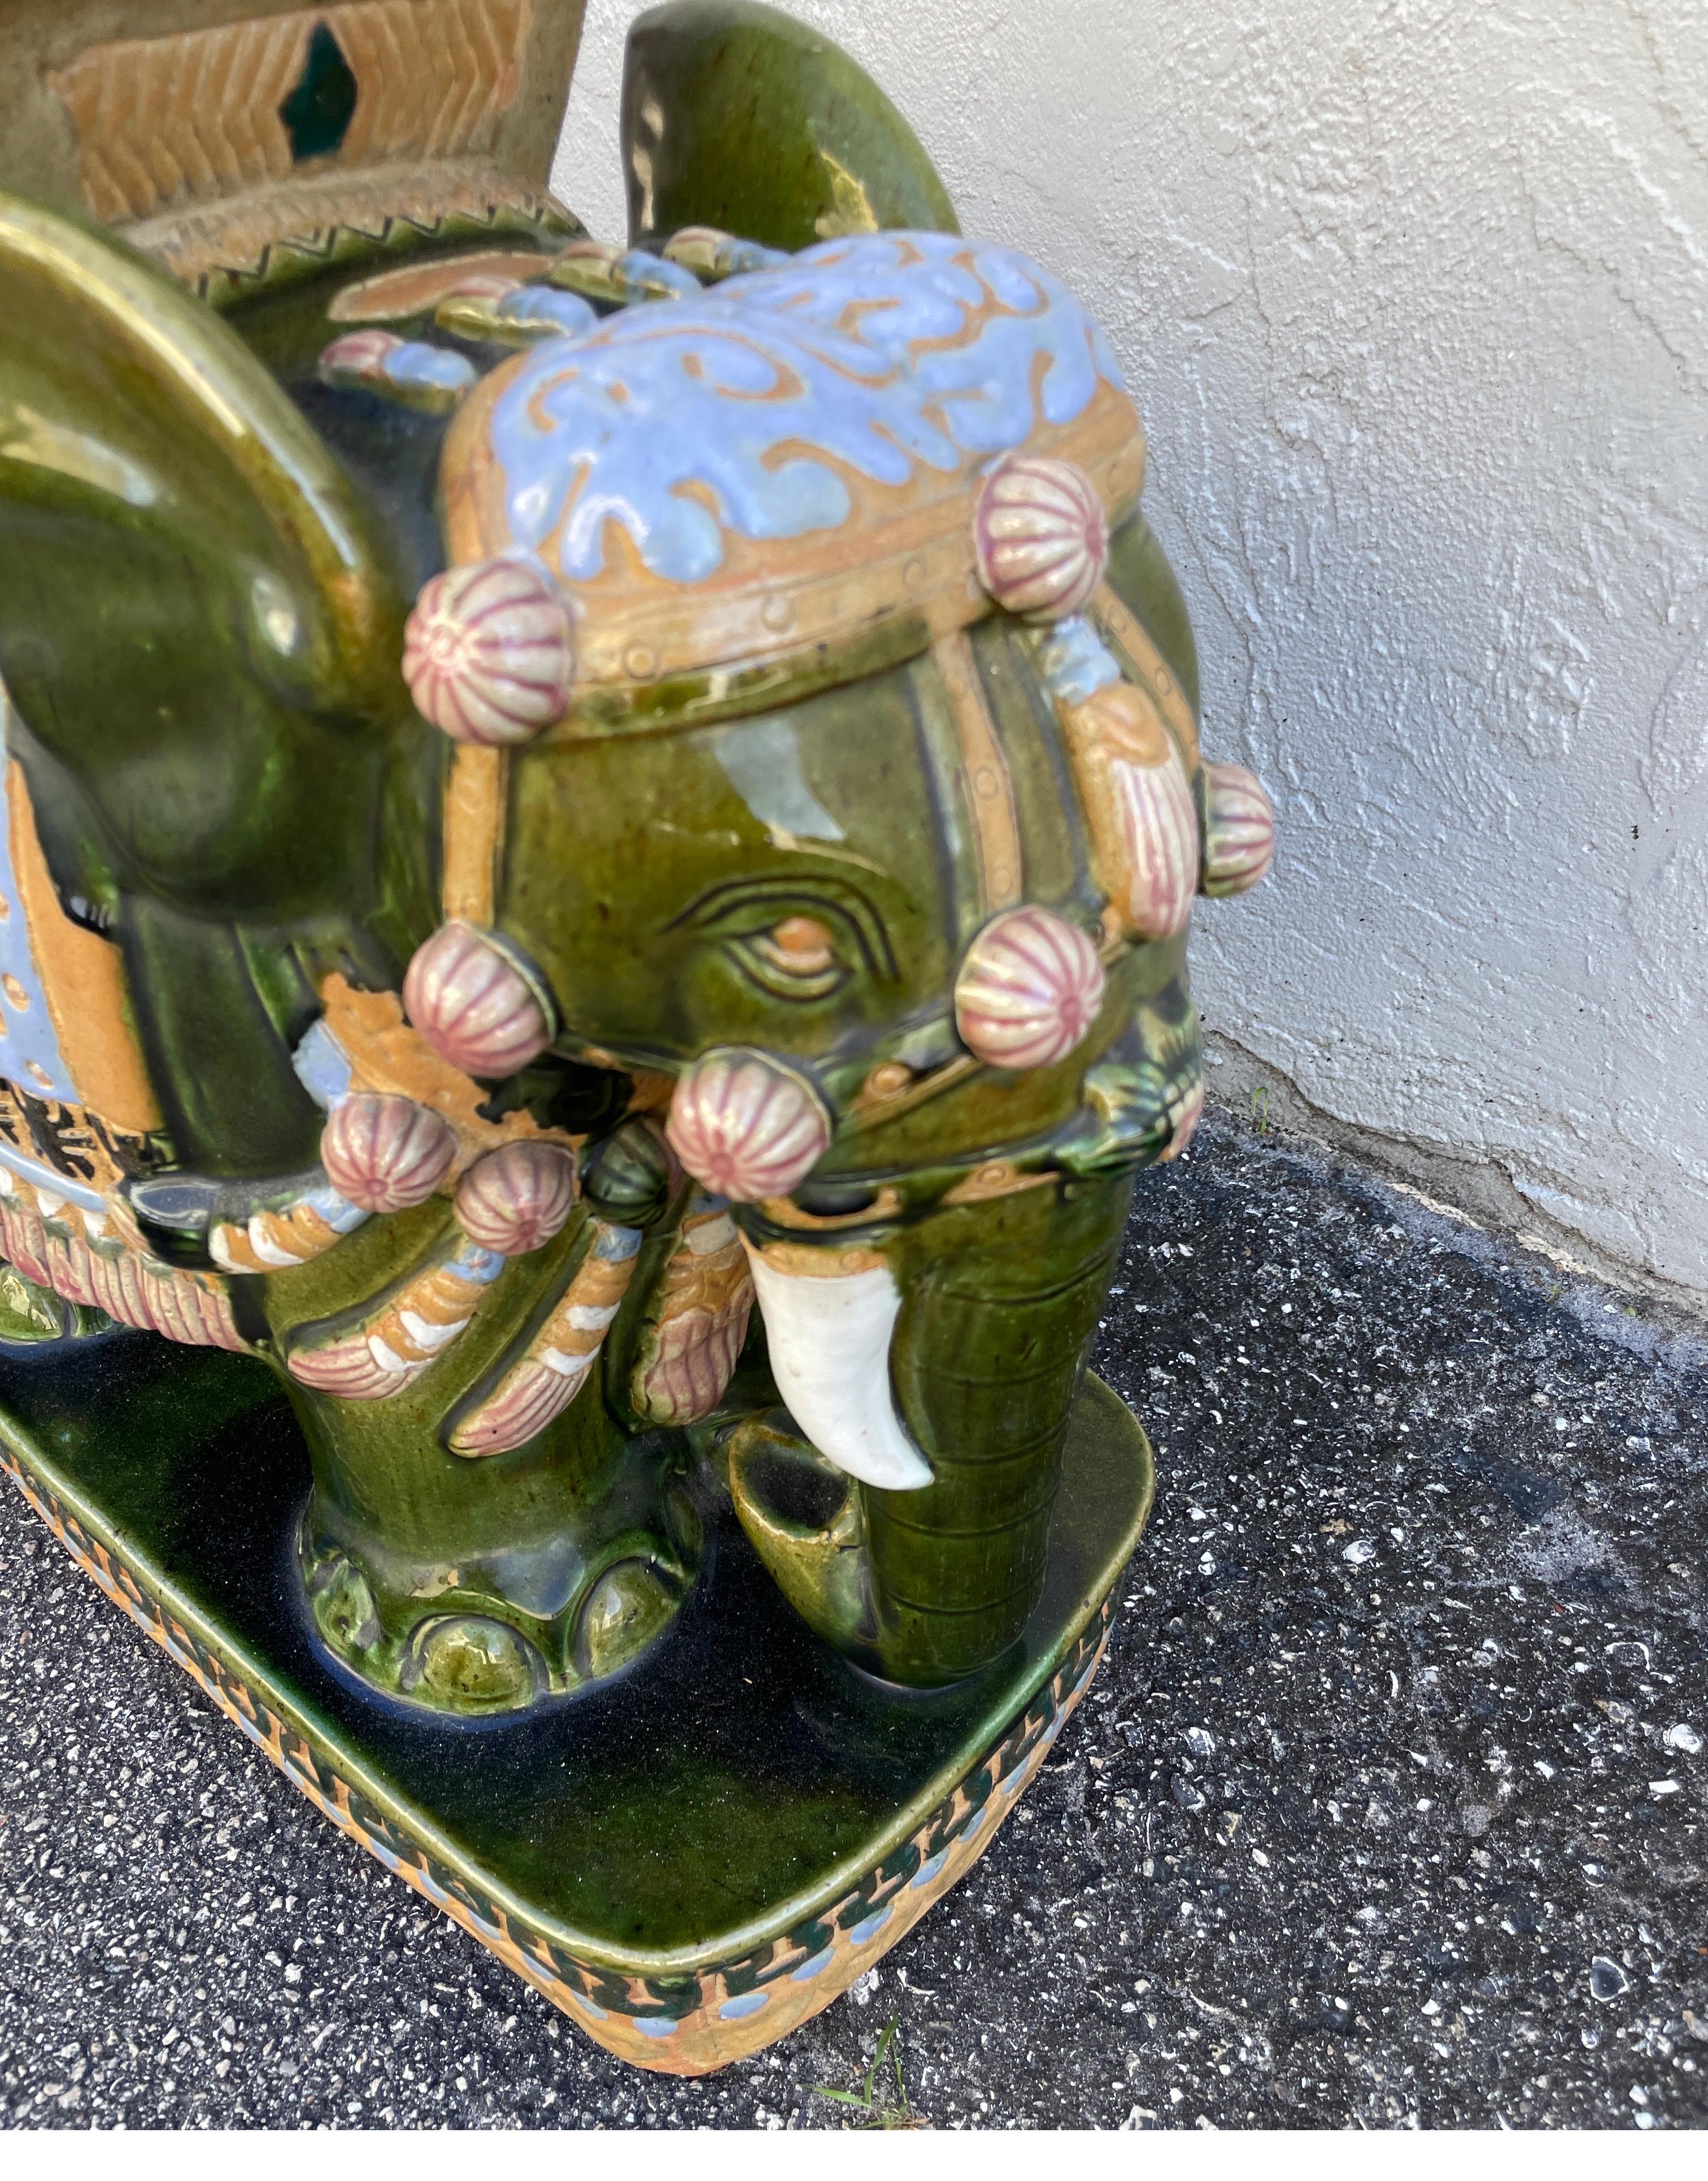 Very fine Asian Glazed Clay Elephant Garden seat. Background color is dark green with accents of gold, white, pink and light blue.